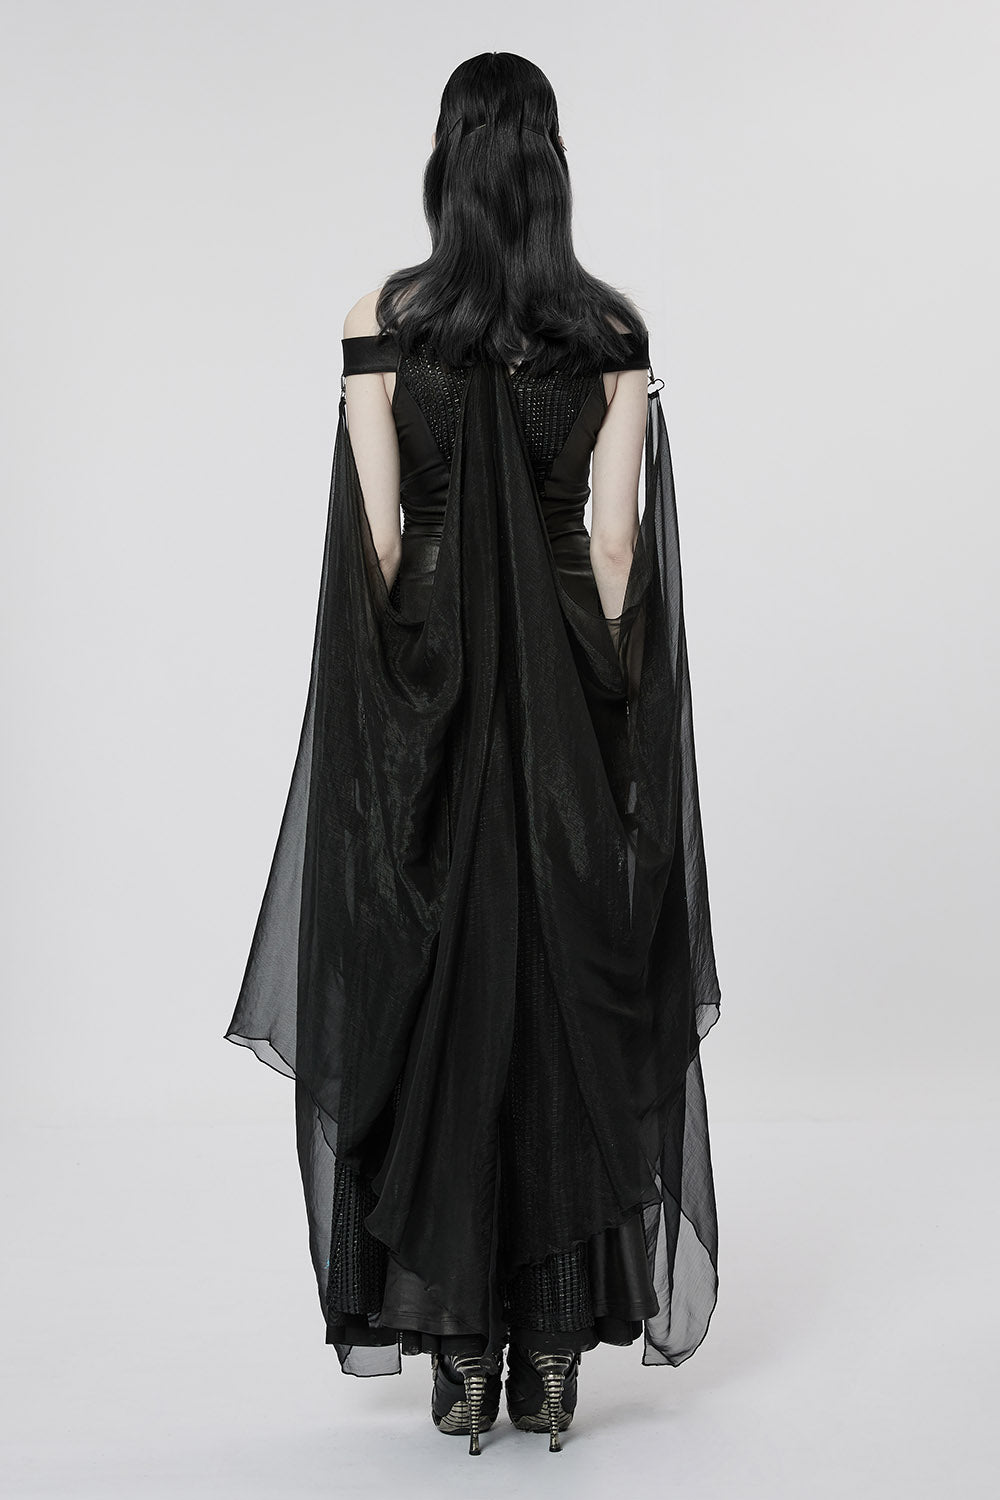 gothic long black gown with cape